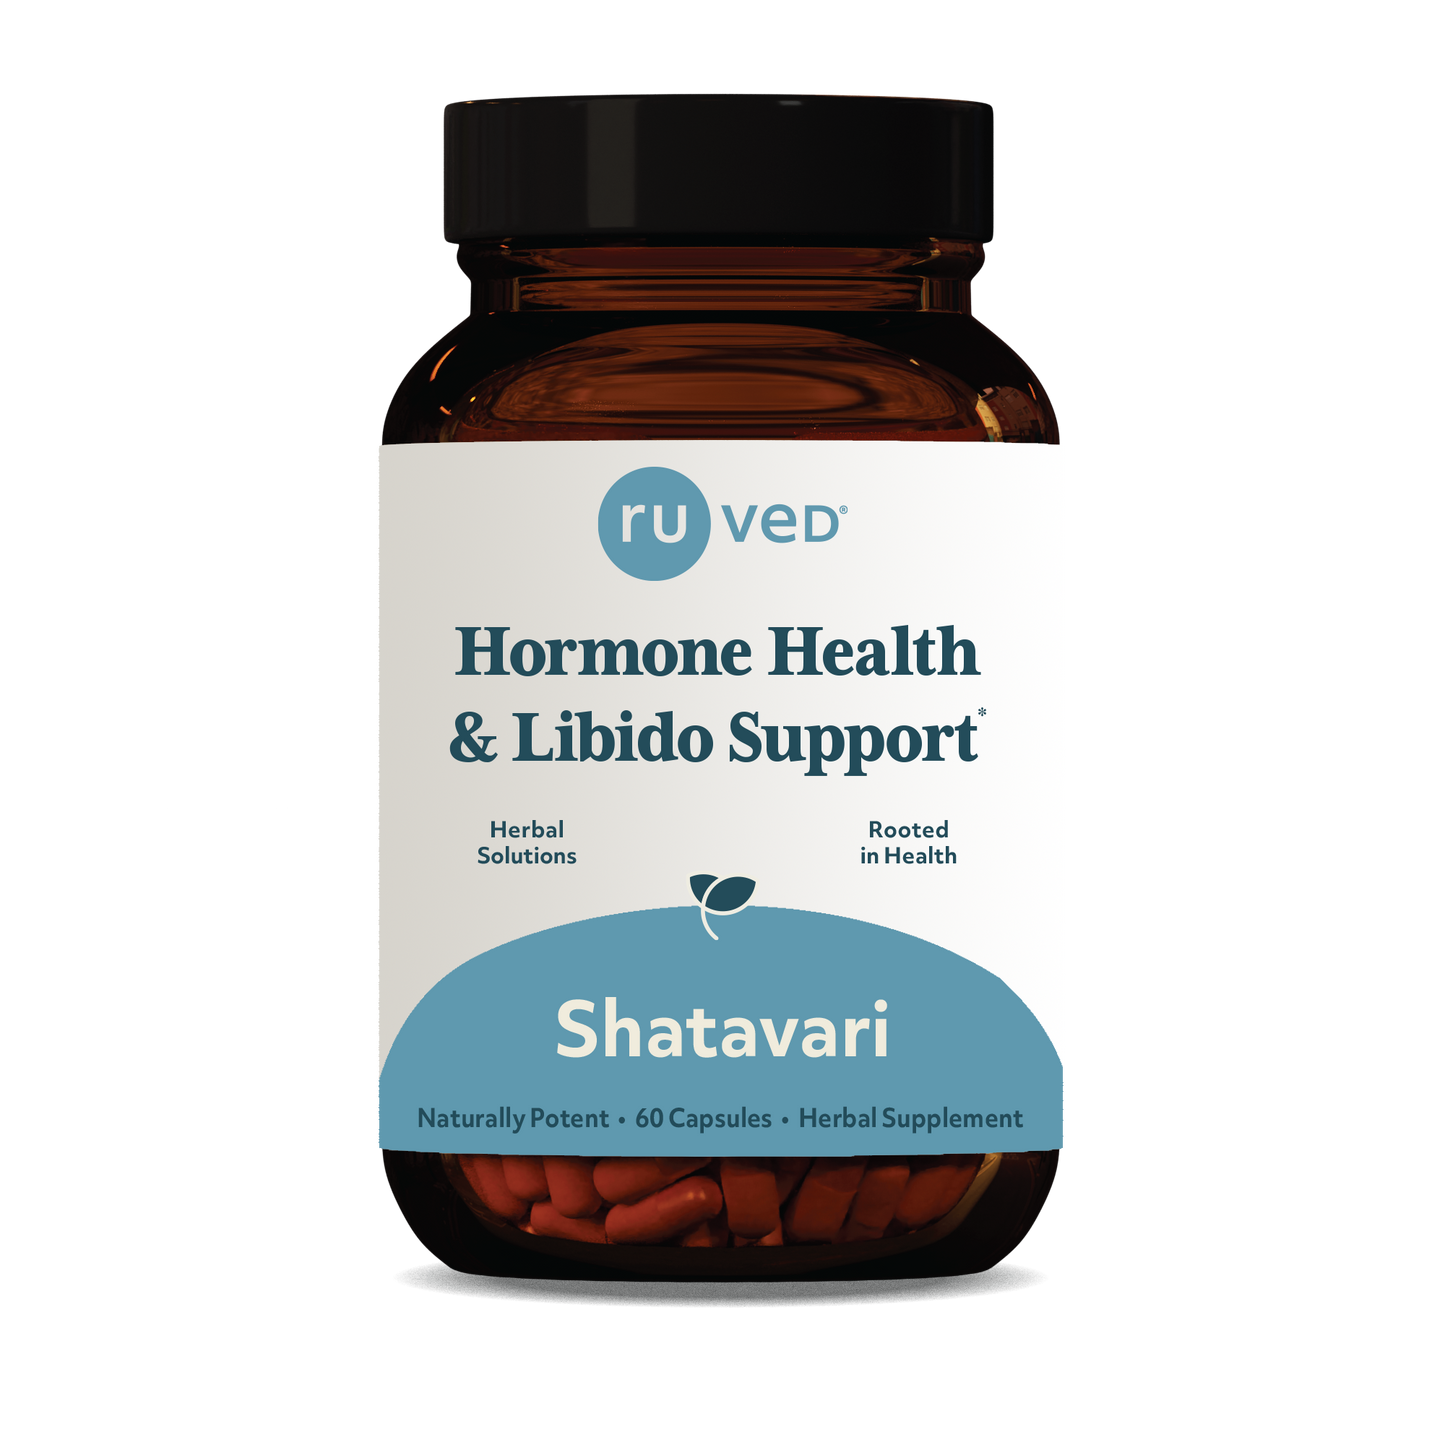 shatavari Daily Hormone Support, Promotes Libido and Healthy Fertility by ruved herbal supplements and ayush herbs